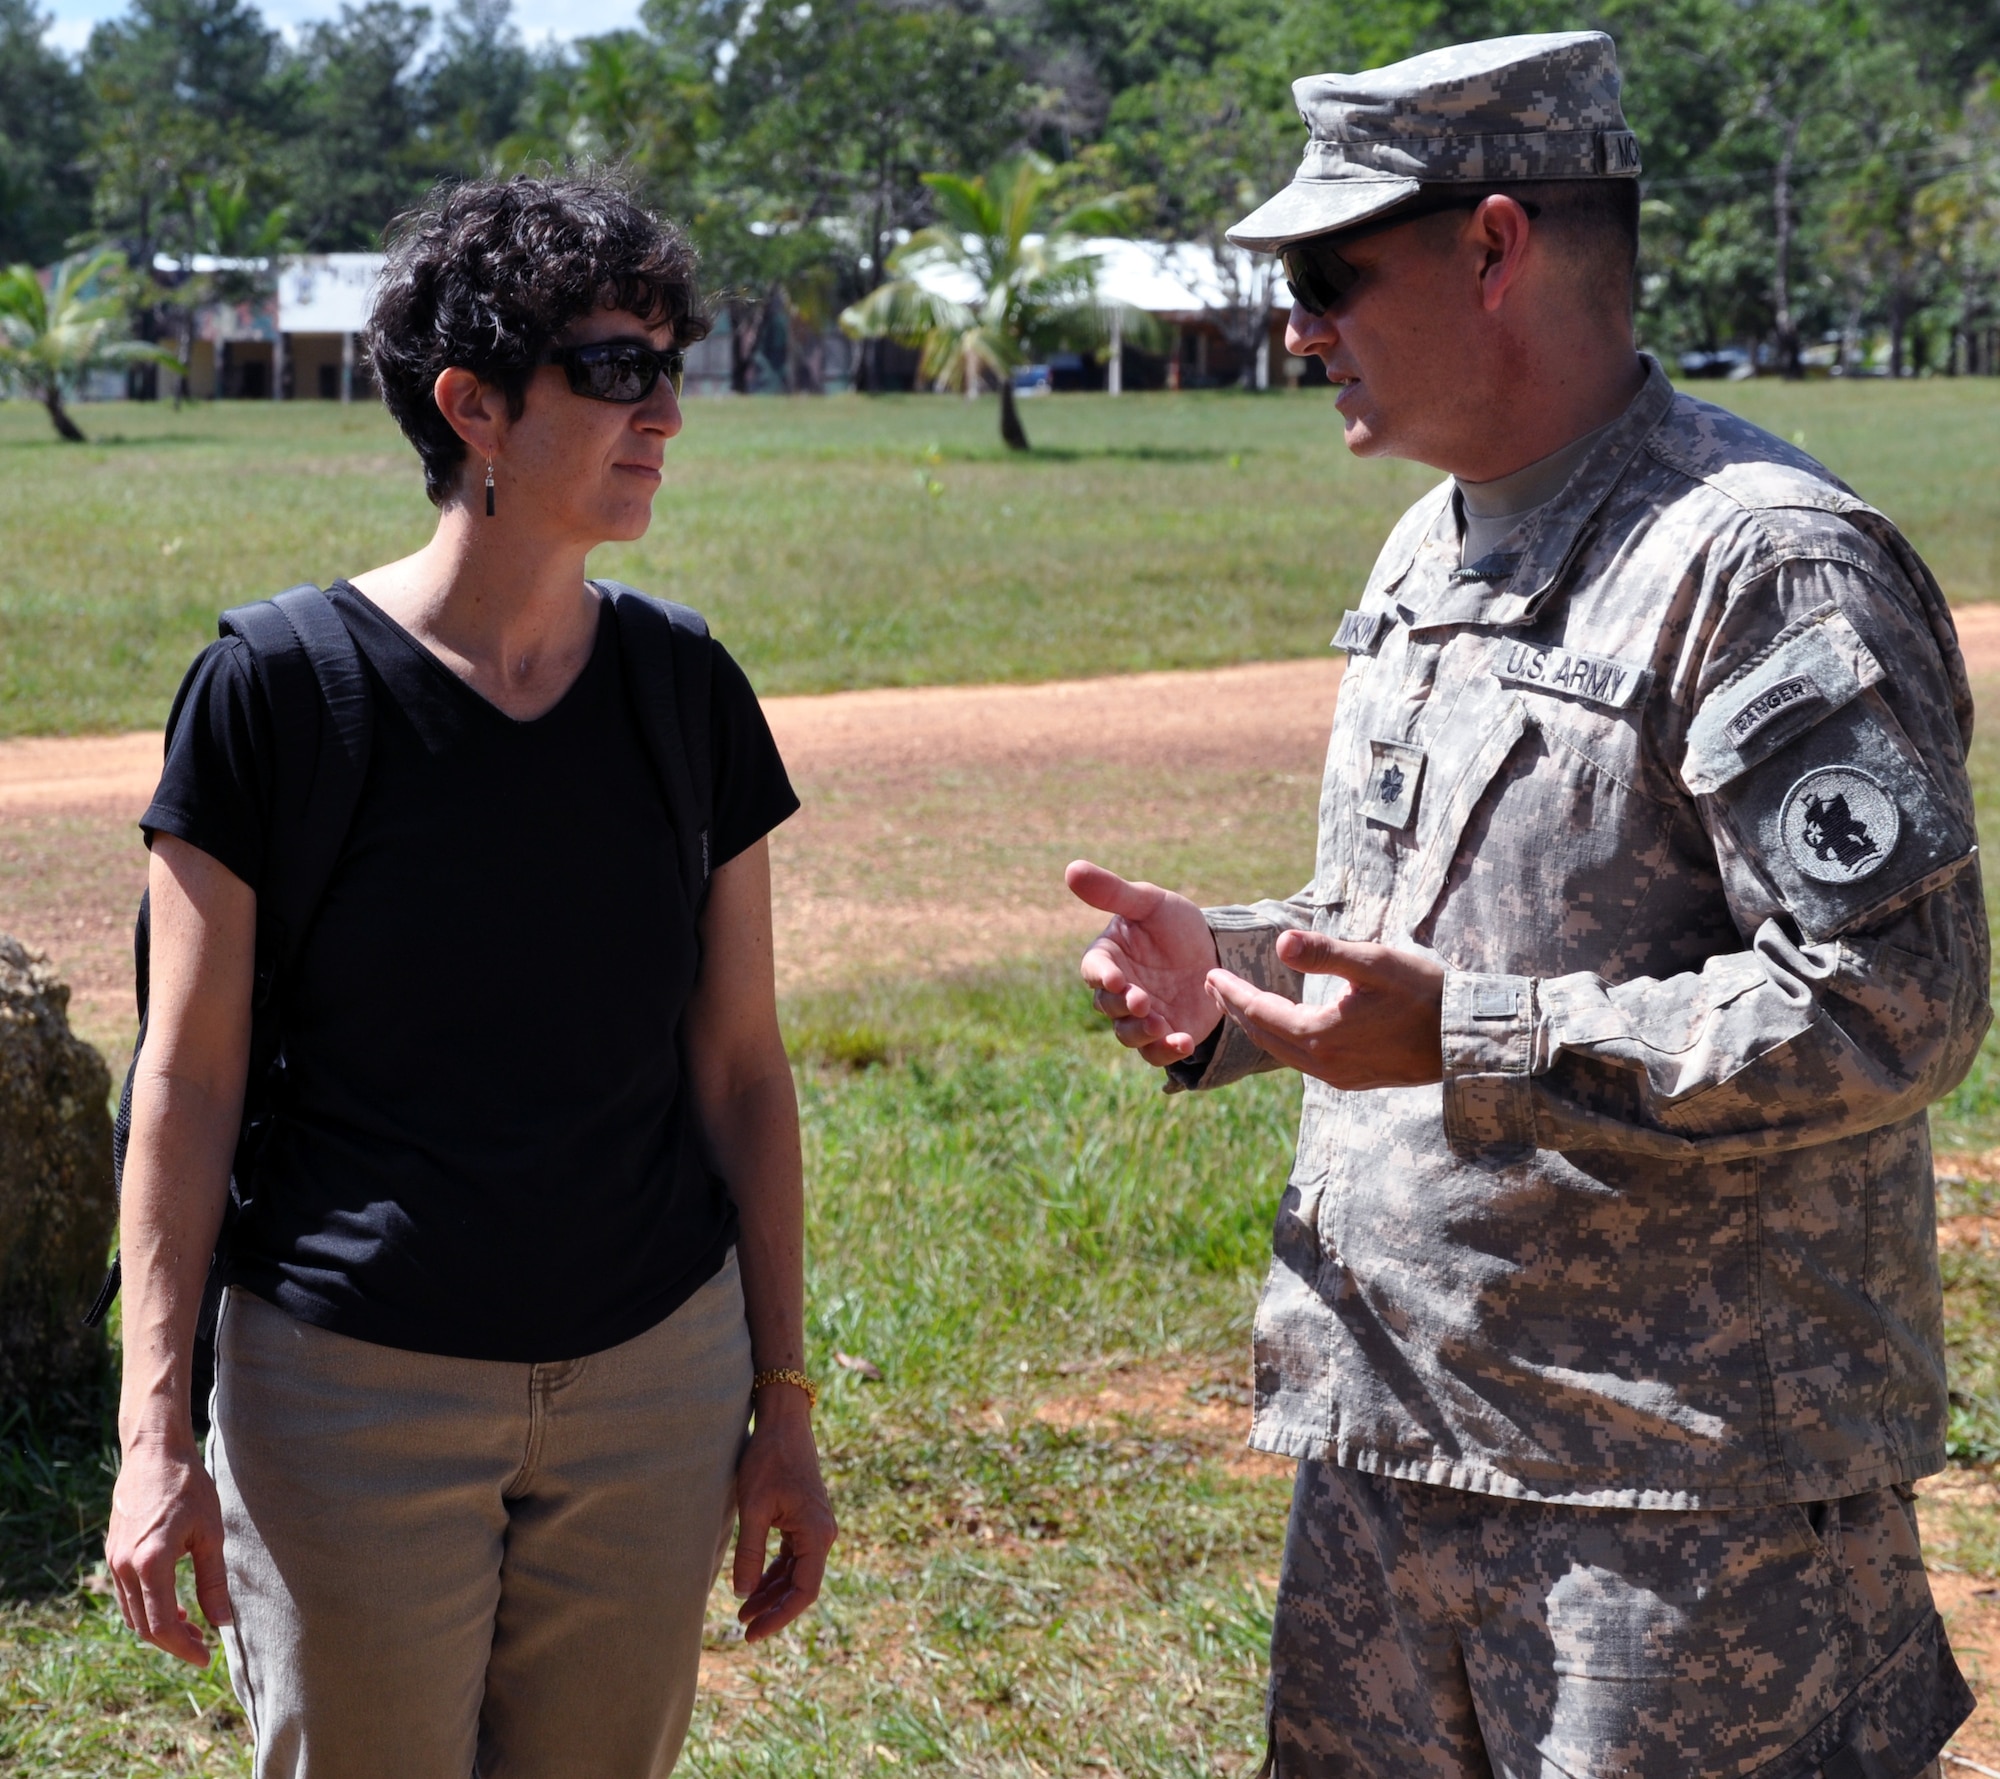 U.S. Army Lt. Col. Alan McKewan discusses the work of the U.S. Southern Command Survey and Assessment Team with Julie Schechter Torres, Deputy Chief of Mission for the U.S. Embassy, during Joint Task Force-Bravo's Culminating Training Exercise (CULEX) at Mocoron, Honduras, Dec. 3, 2013.  More than 90 members of Joint Task Force-Bravo deployed to the Department of Gracias a Dios for the exercise.  (U.S. Air Force photo by Capt. Zach Anderson)